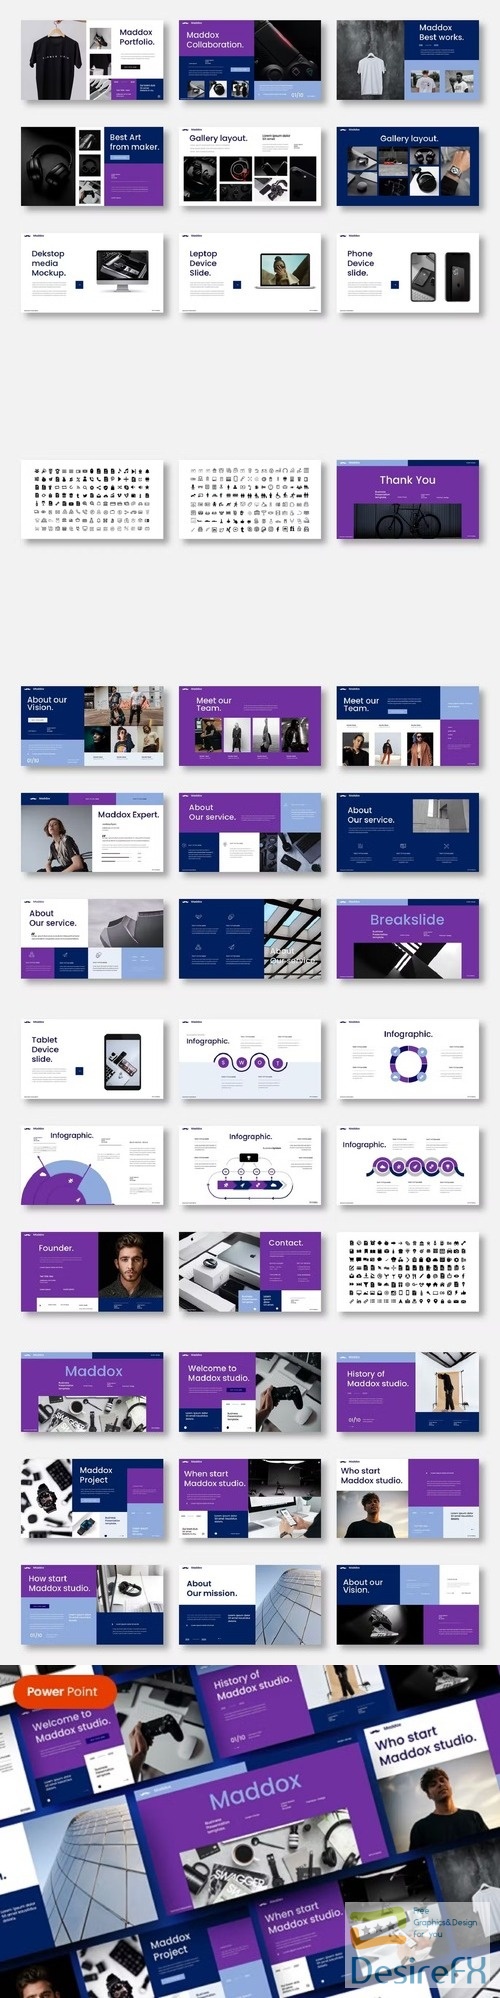 Maddox - Business PowerPoint Template